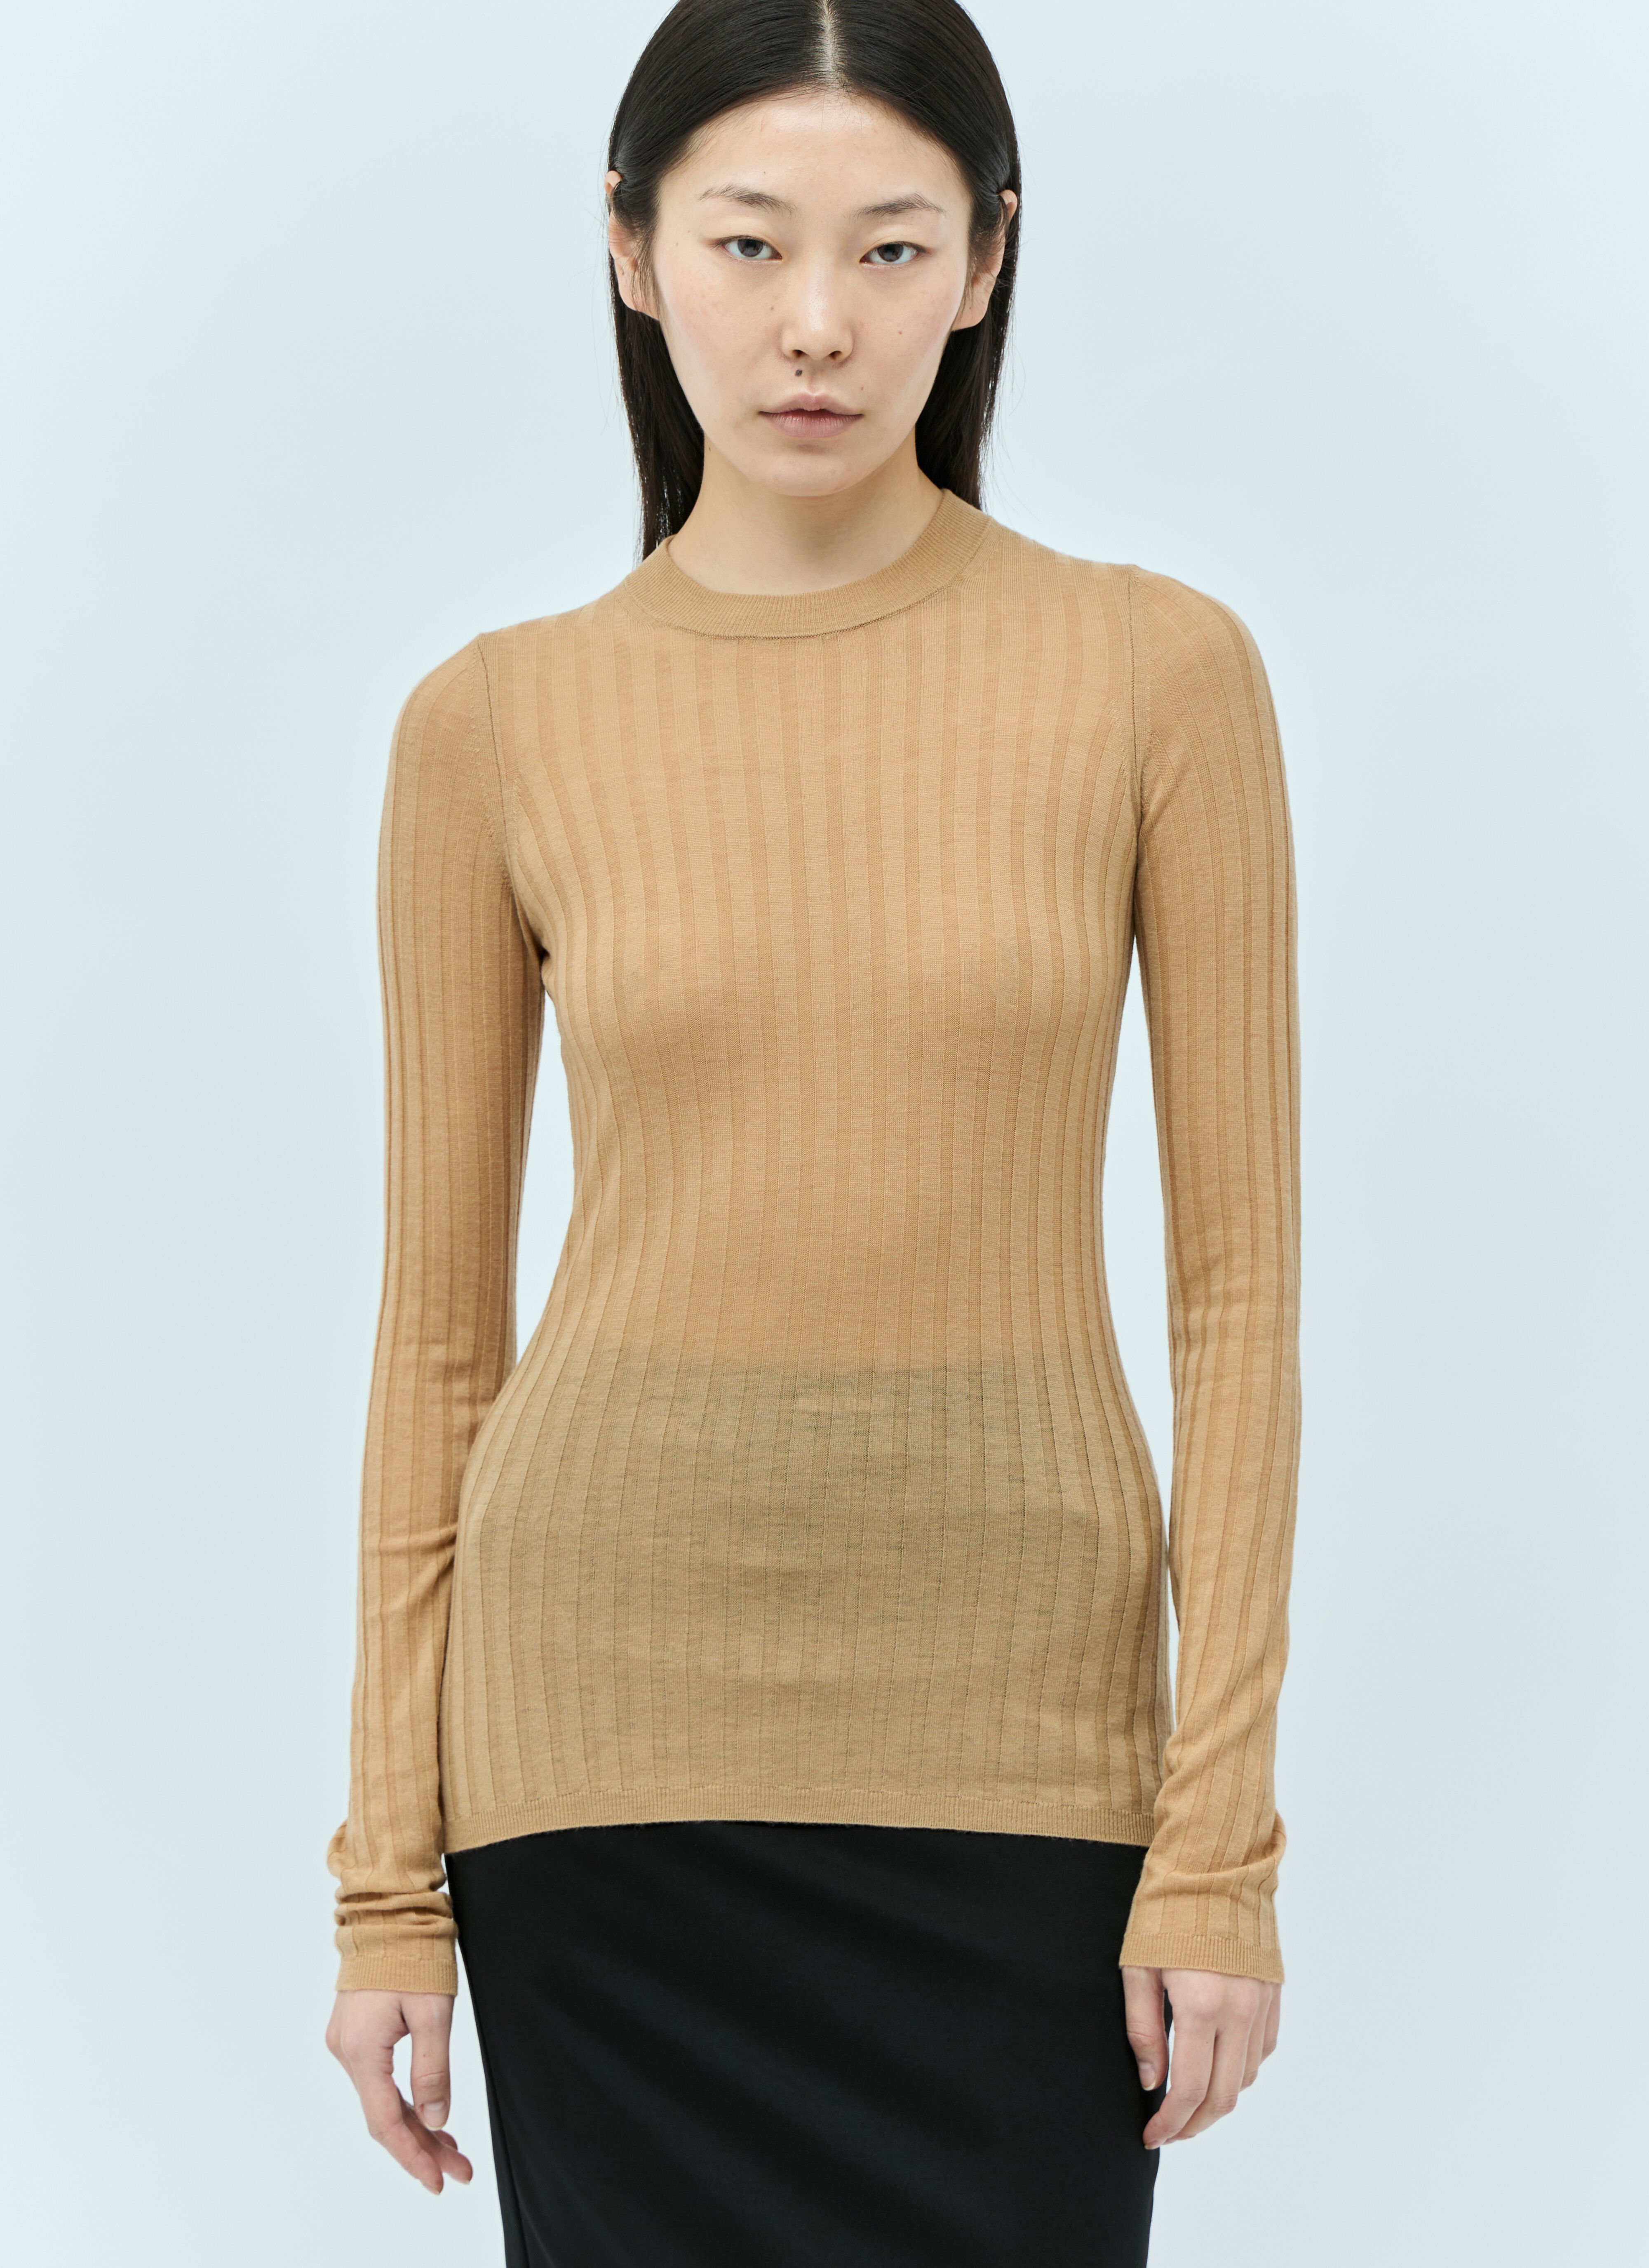 Sportmax Ribbed Wool Sweater White spx0256003